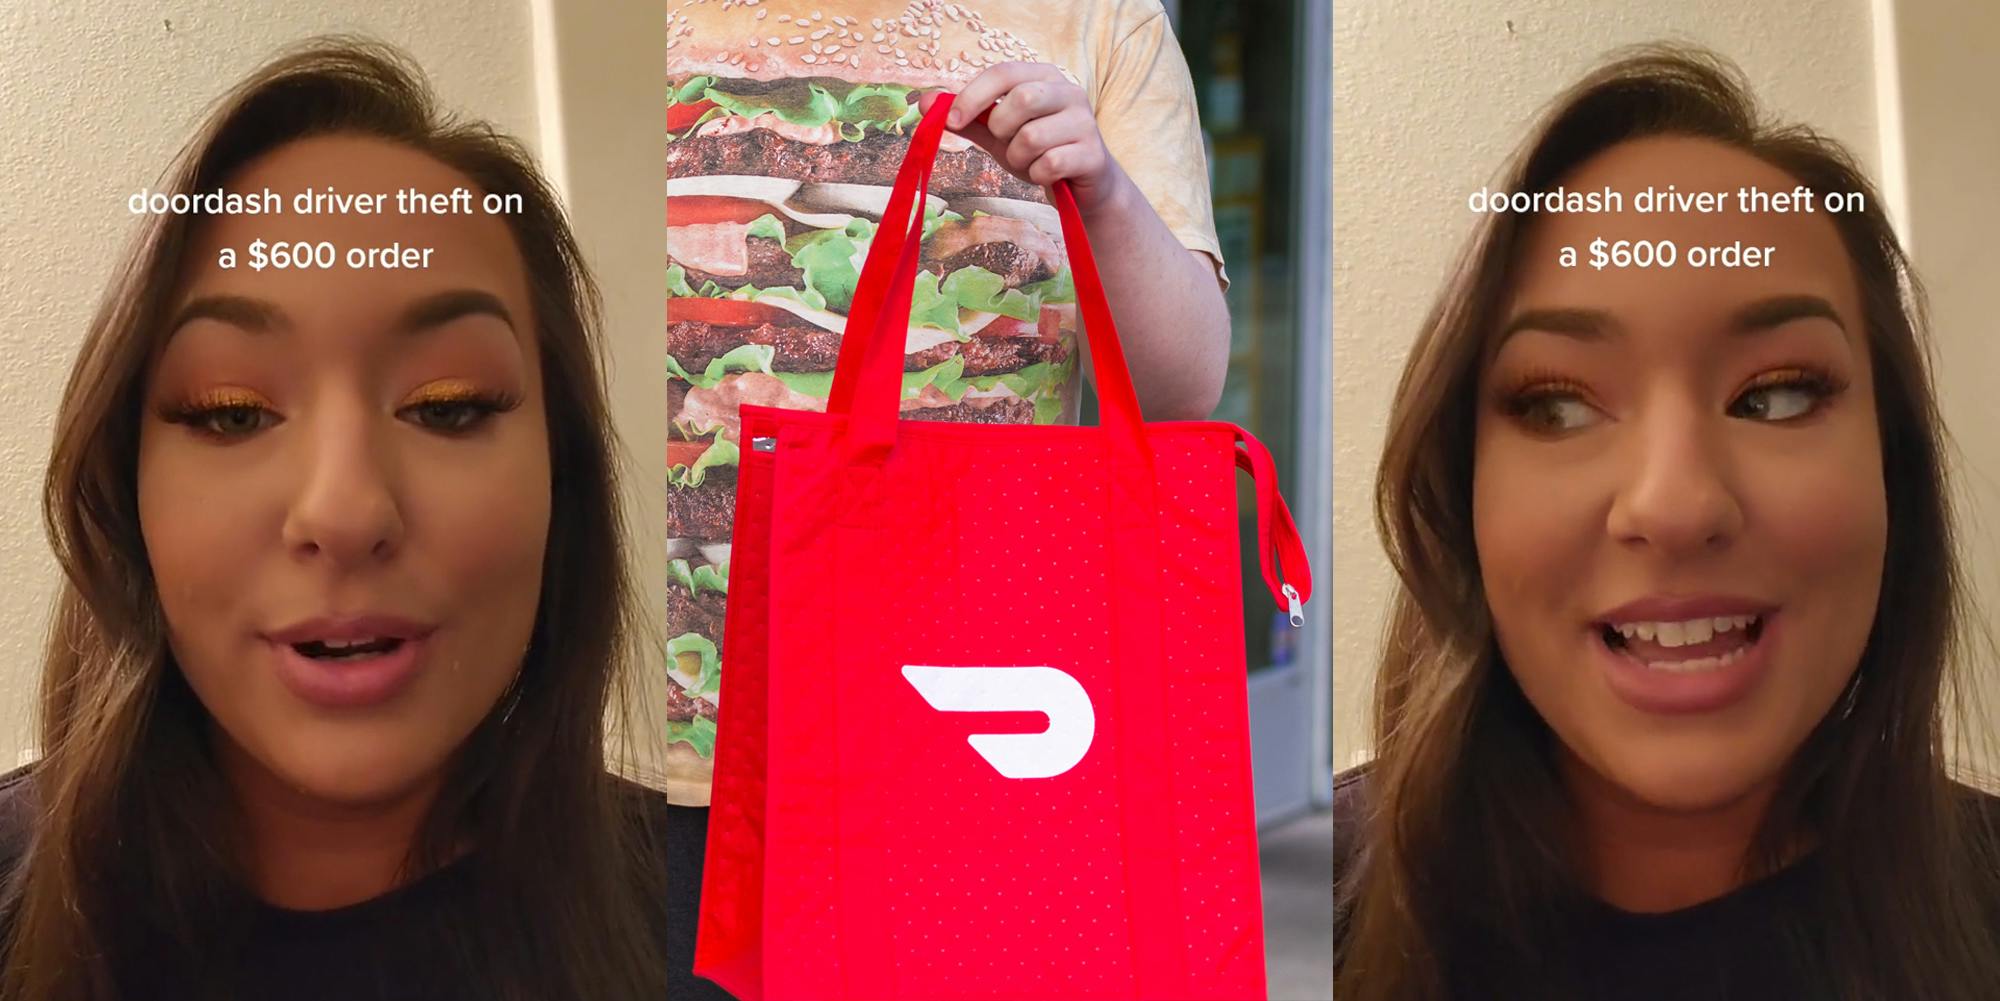 worker speaking in front of tan wall with caption "doordash driver theft on a $600 order" (l) DoorDash driver holding branded bag outside (c) worker speaking in front of tan wall with caption "doordash driver theft on a $600 order" (r)